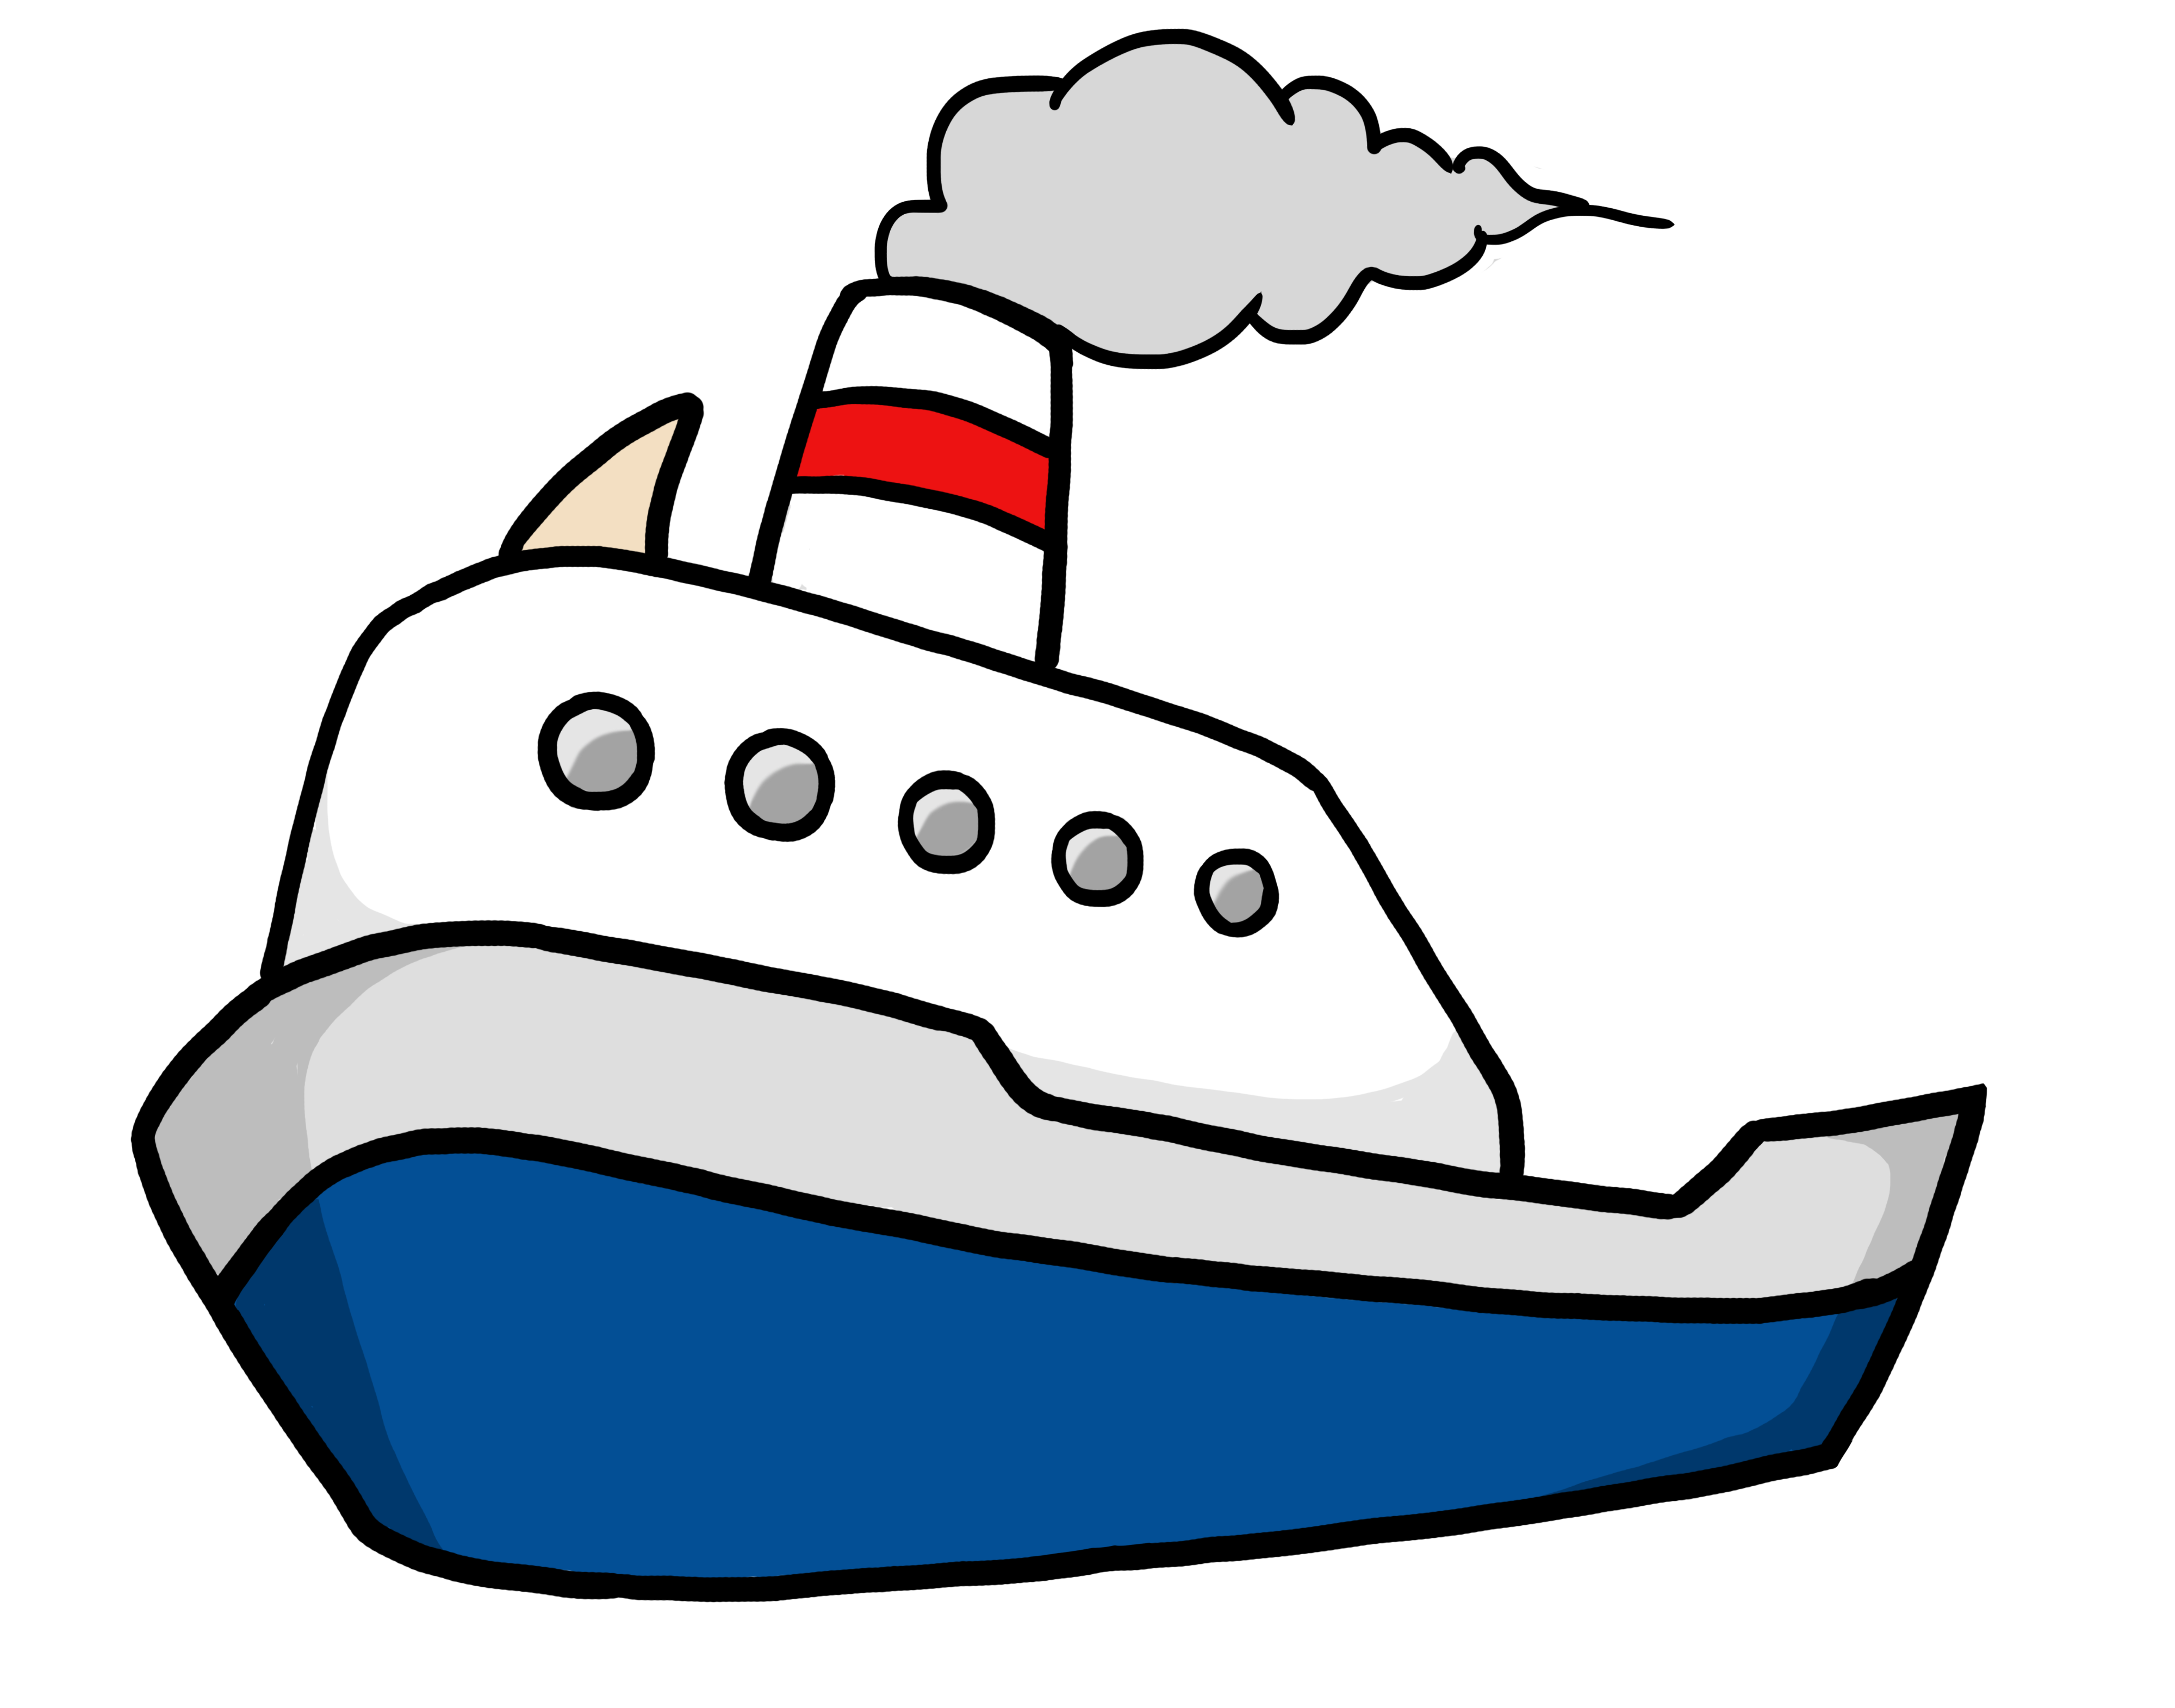 Yacht Clipart - Cliparts.co